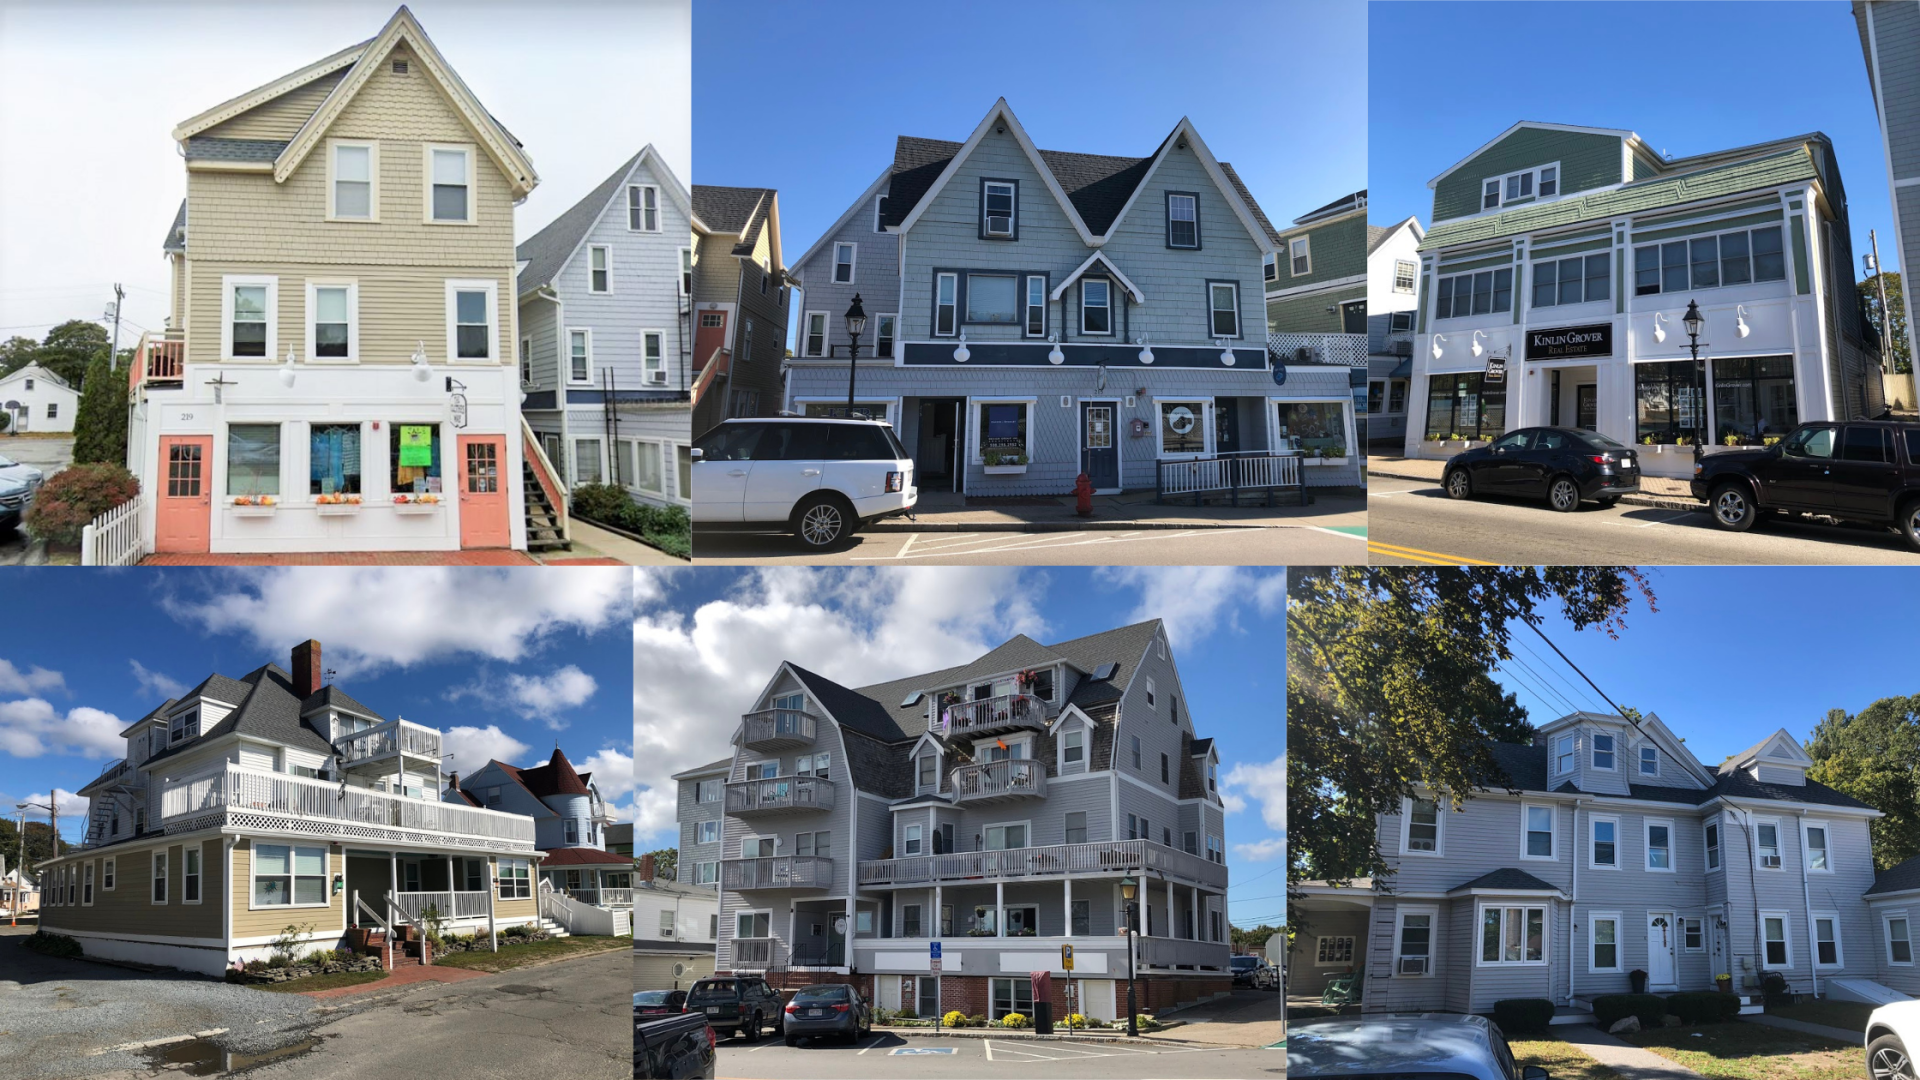 October 13, 2020 | South Shore Rentals Purchase of Seven Buildings in Onset & Wareham, MA